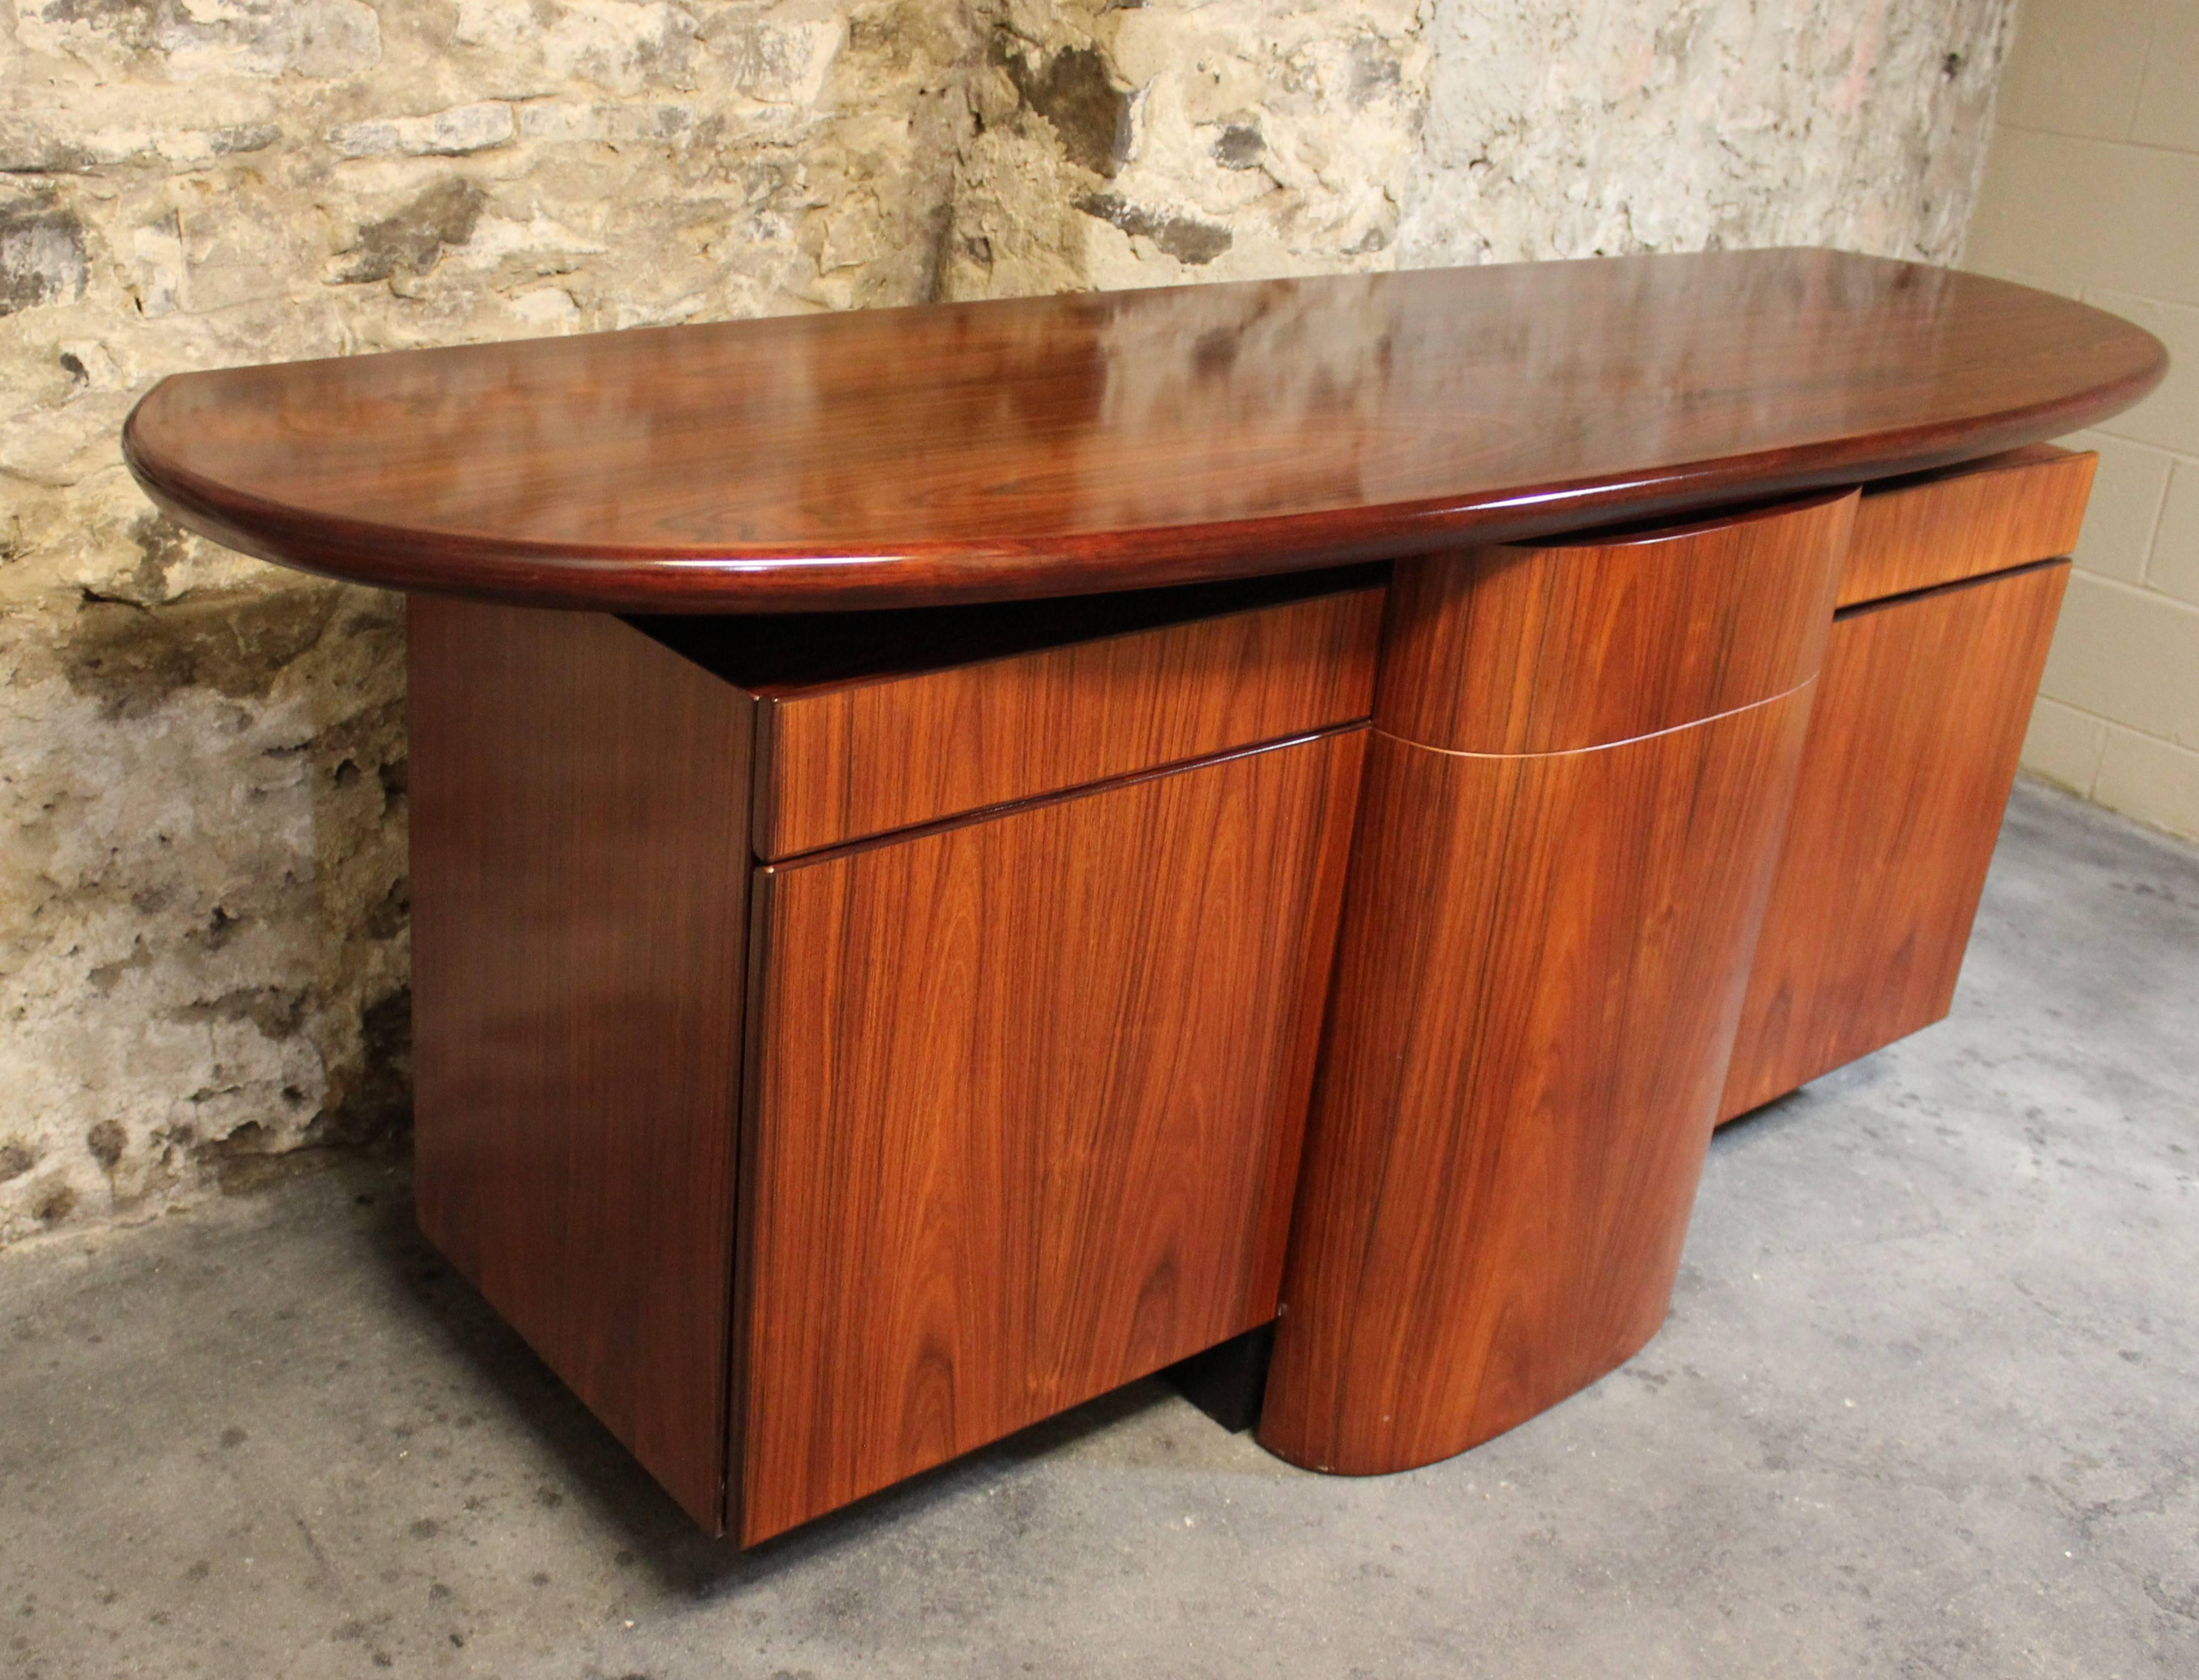 Gorgeous rosewood sideboard by Skovby Mobelfabrik. The stunning Brazilian rosewood throughout is in fantastic condition. This unit features a sleek design with plenty of storage space. What's unique about this credenza is that the center piece is